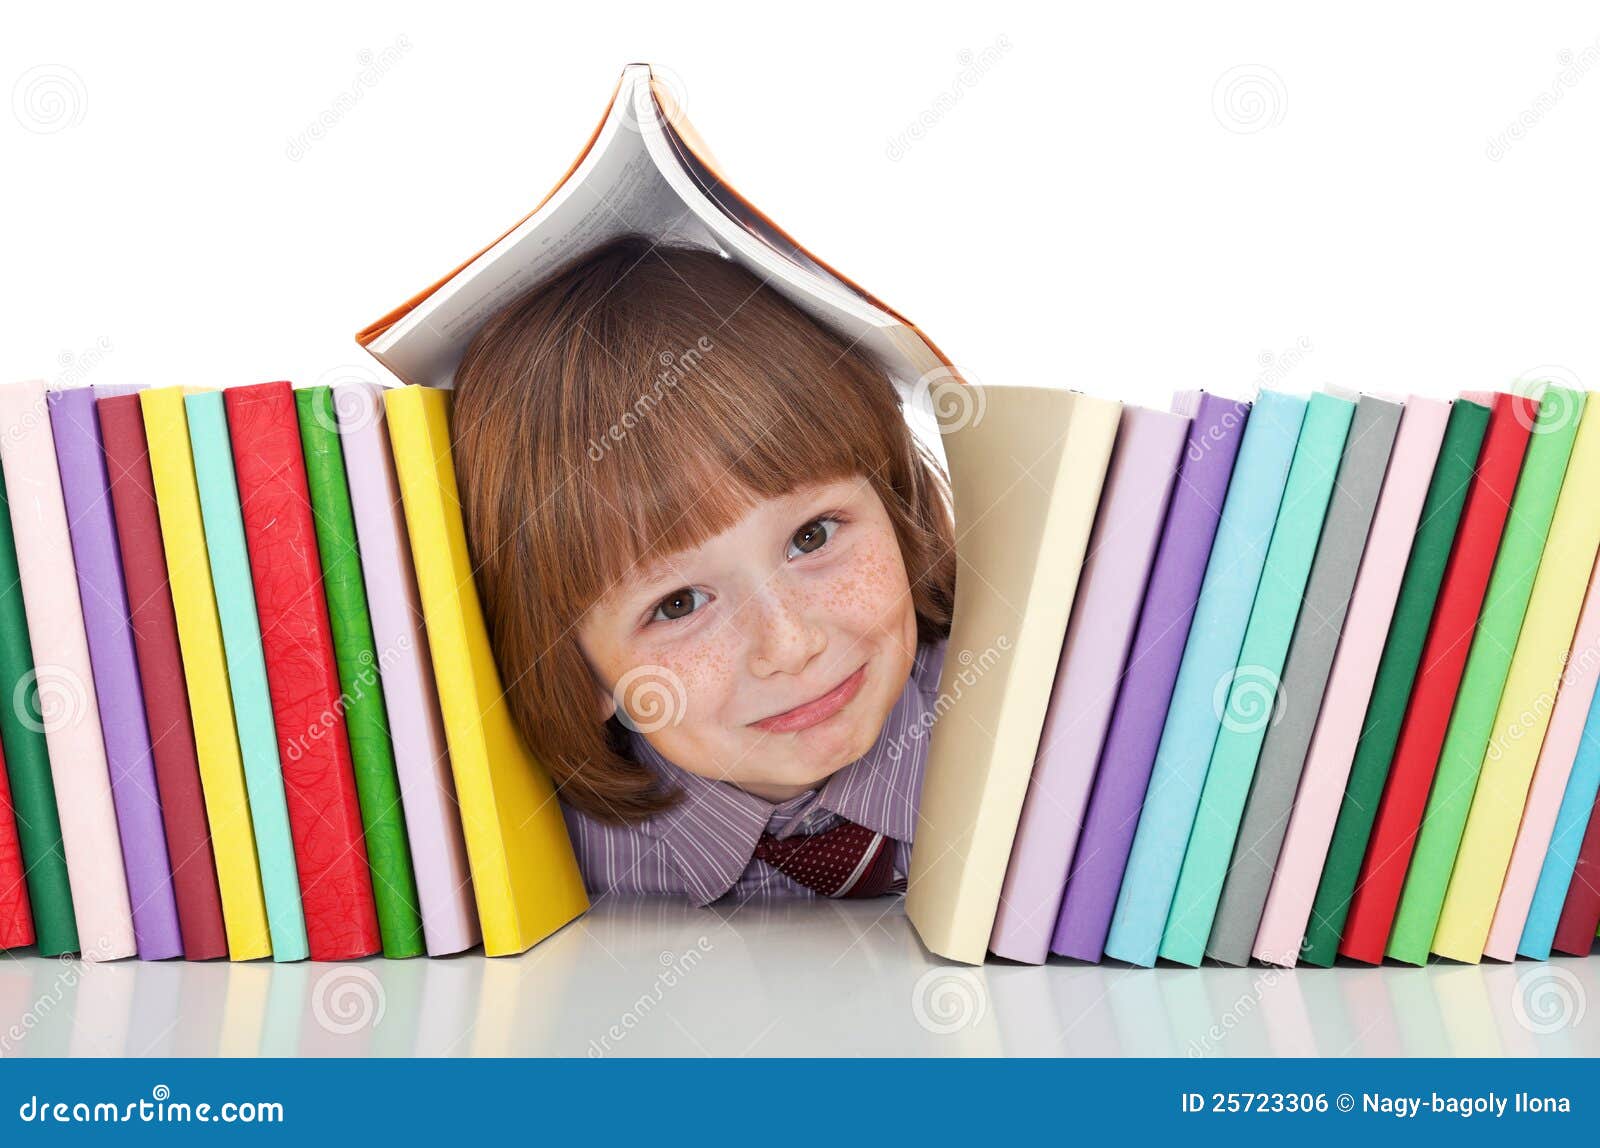 mischievous kid with freckles and books